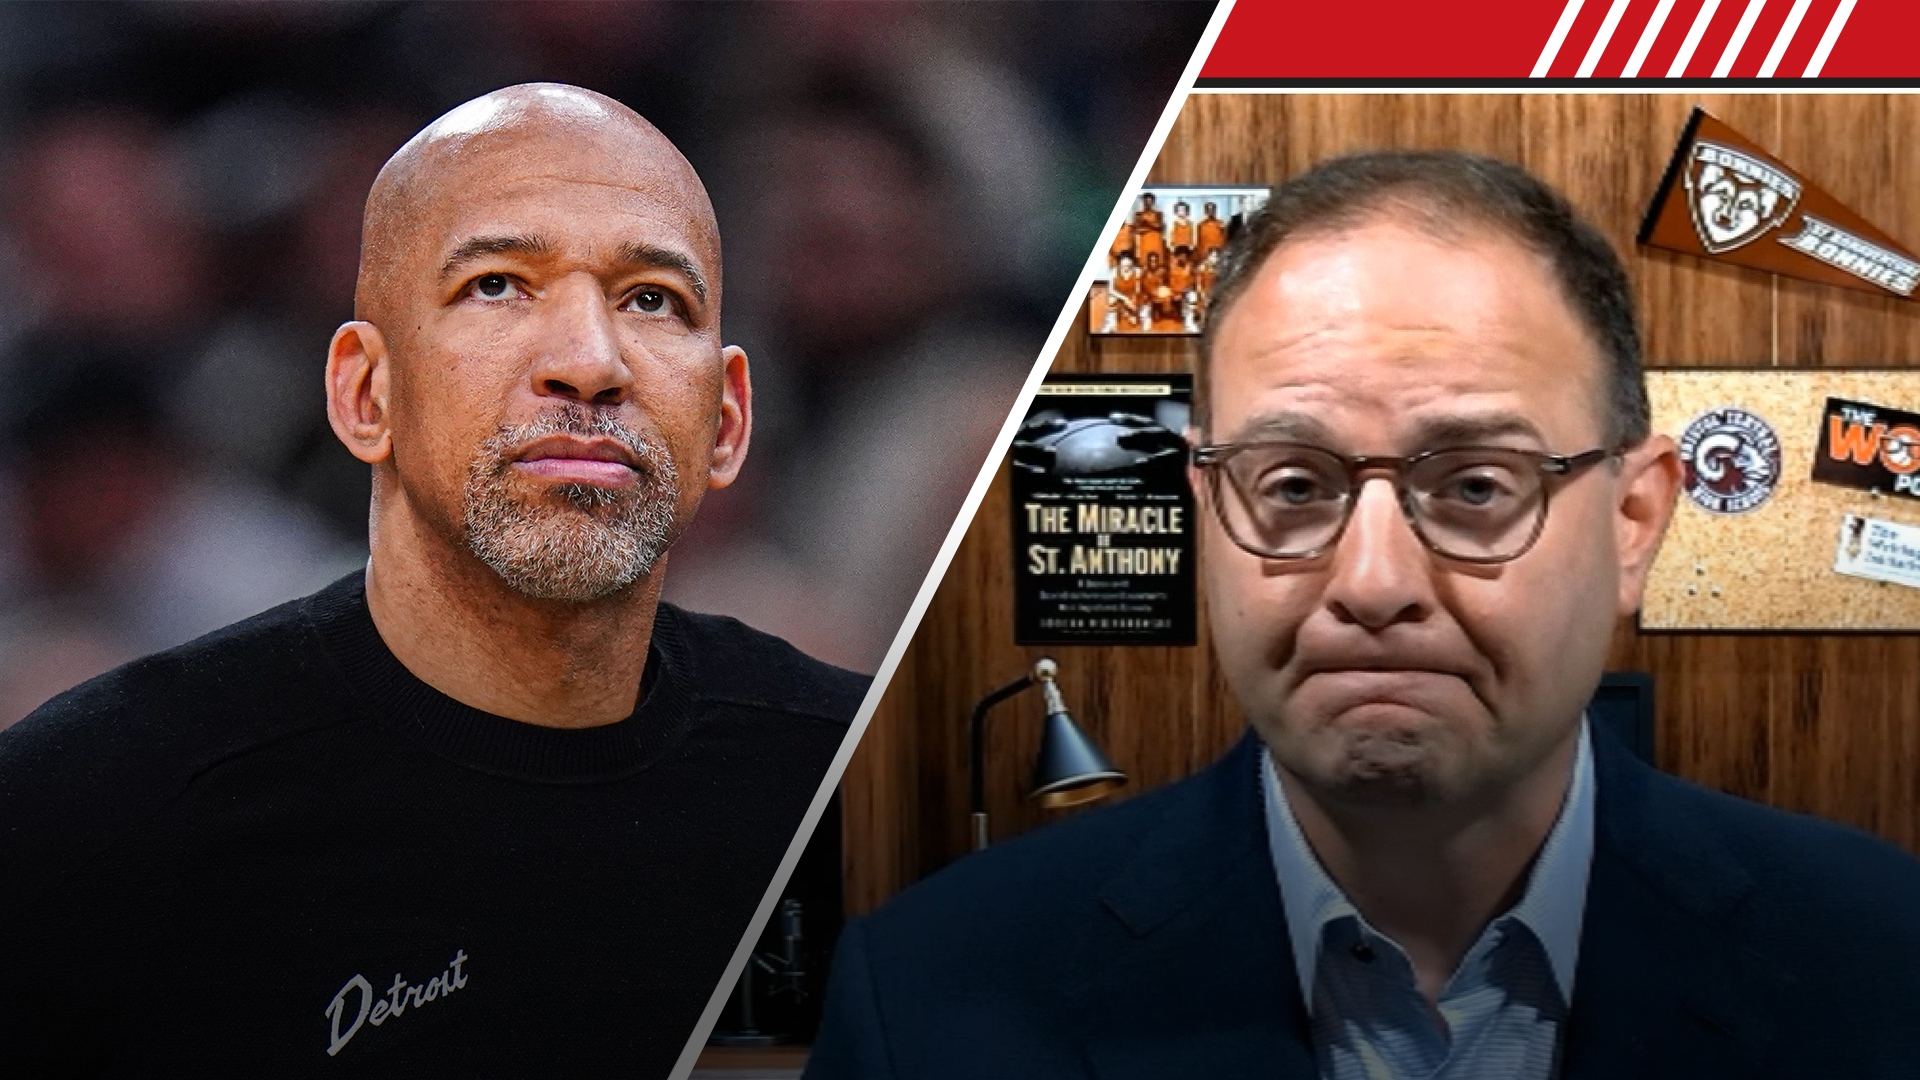 Woj: Monty Williams was blindsided by timing of dismissal